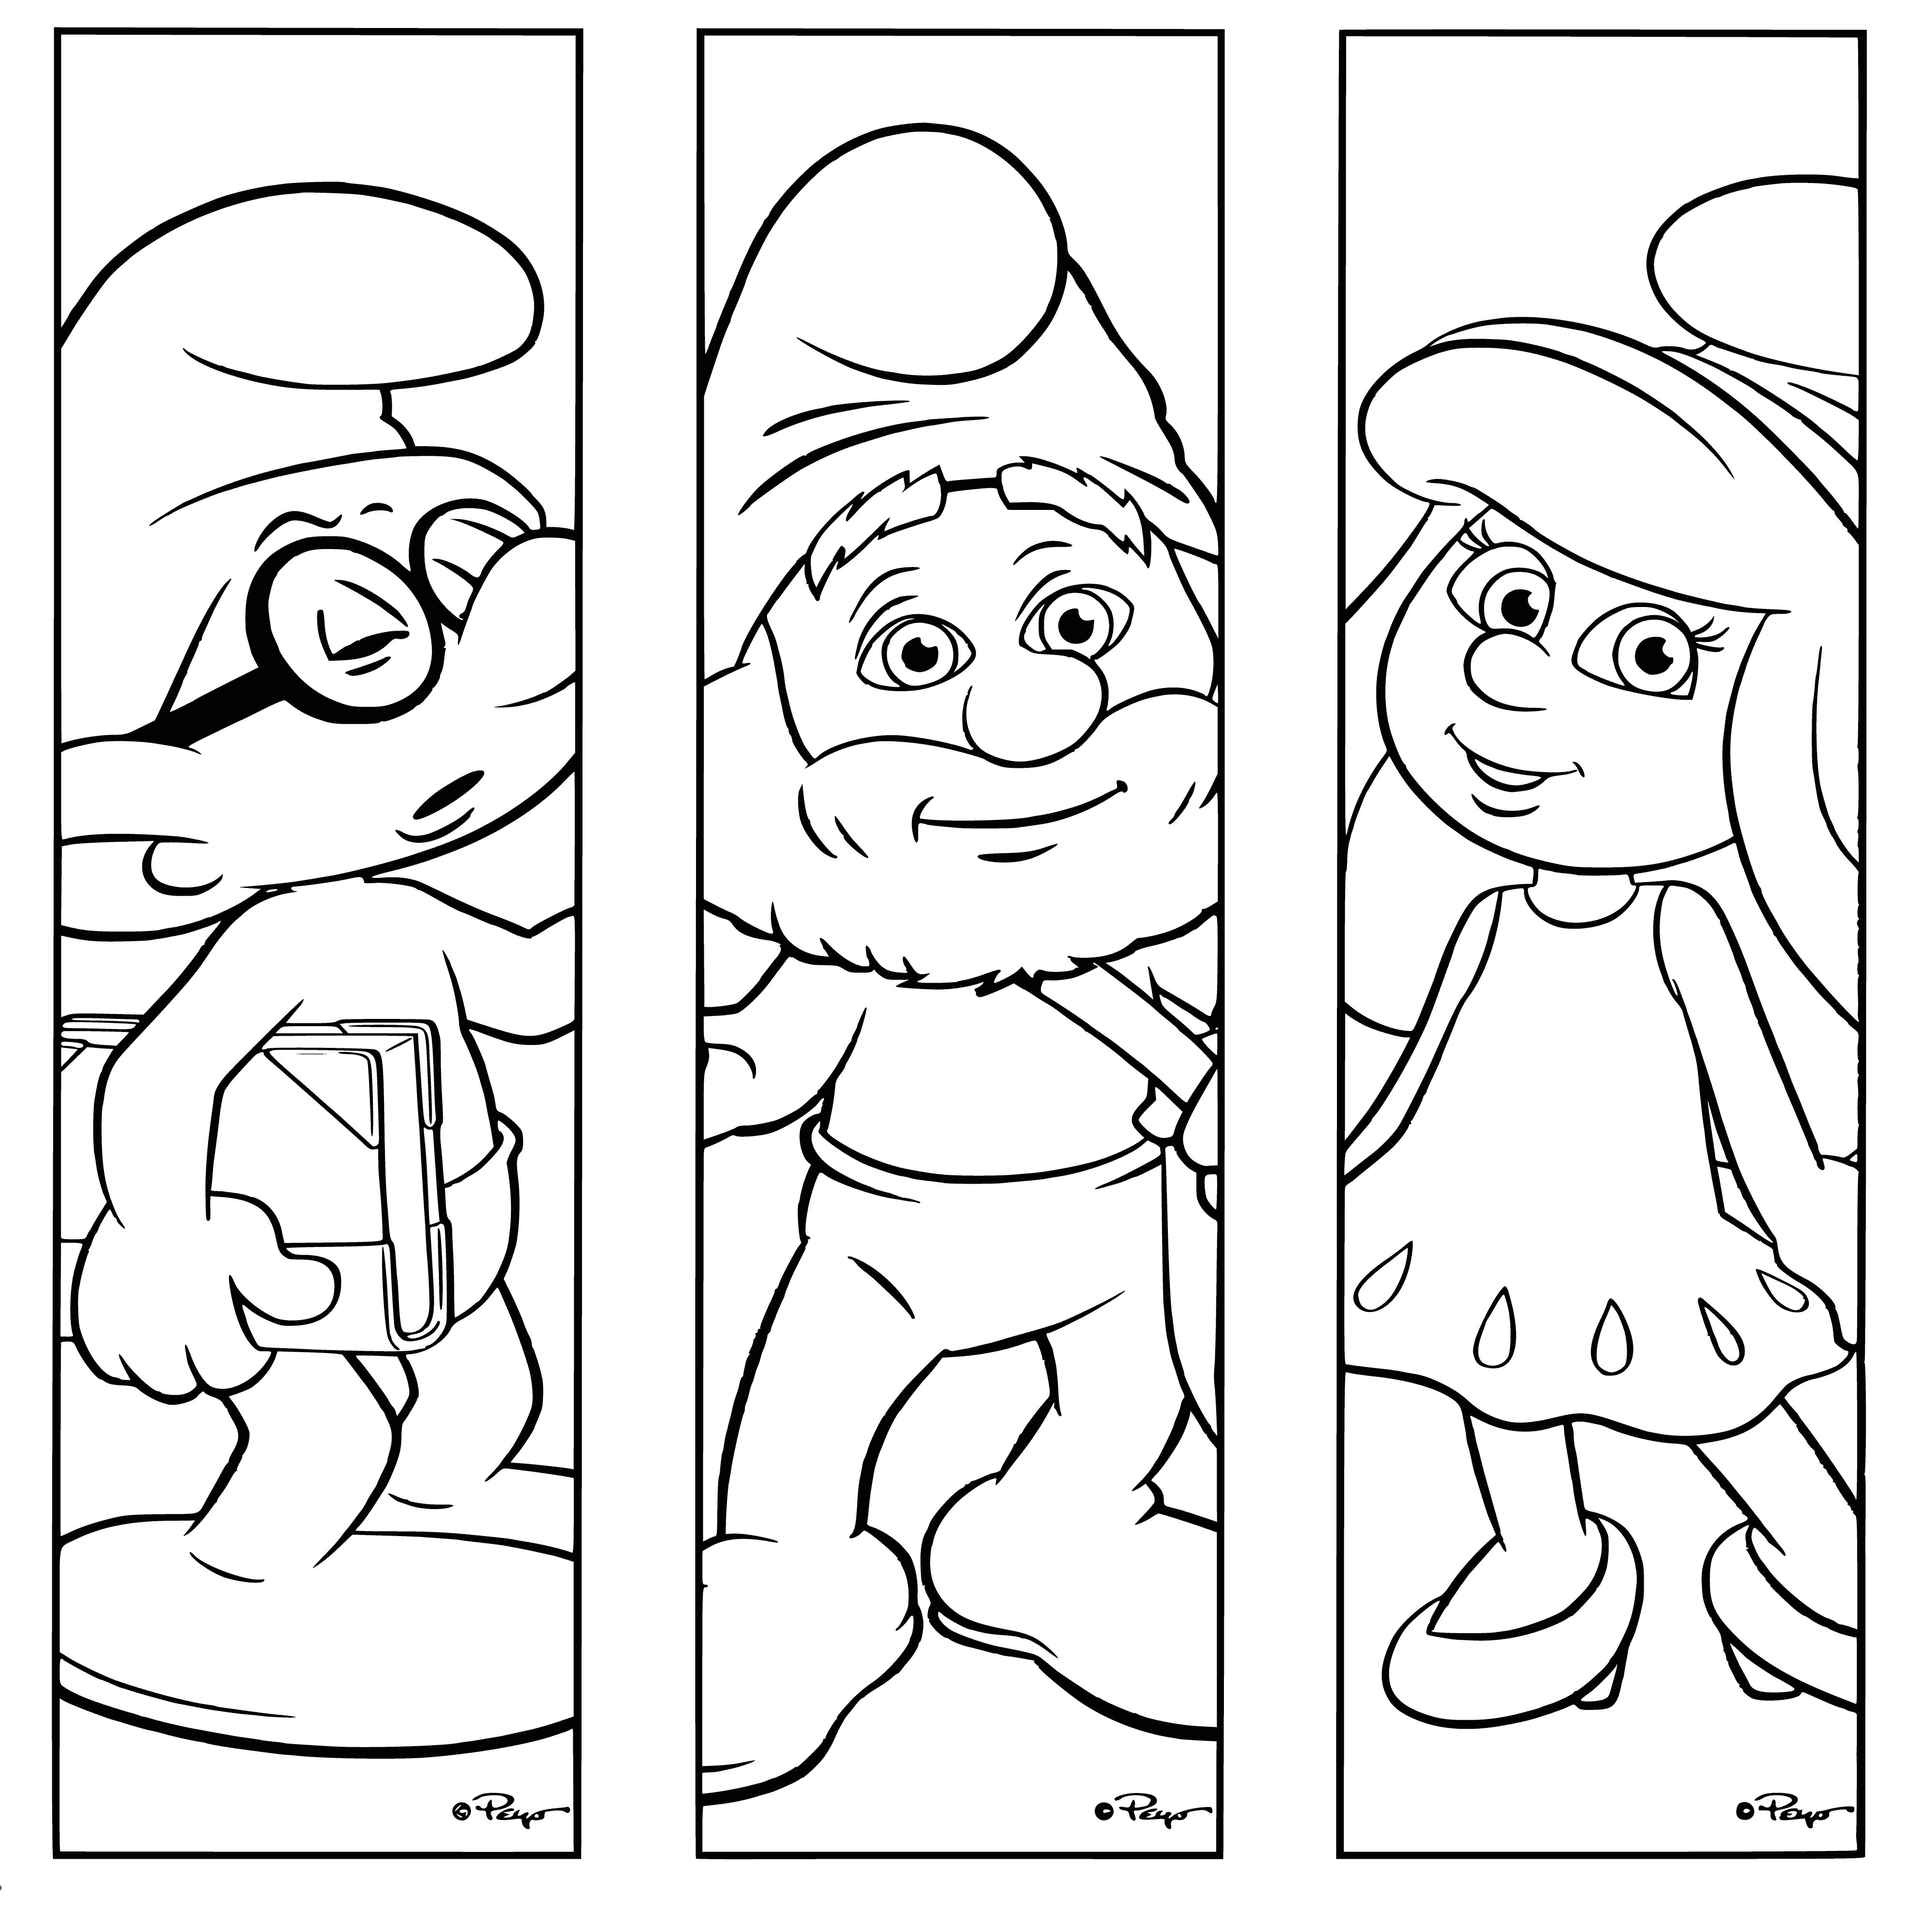 Book bookmarks coloring page